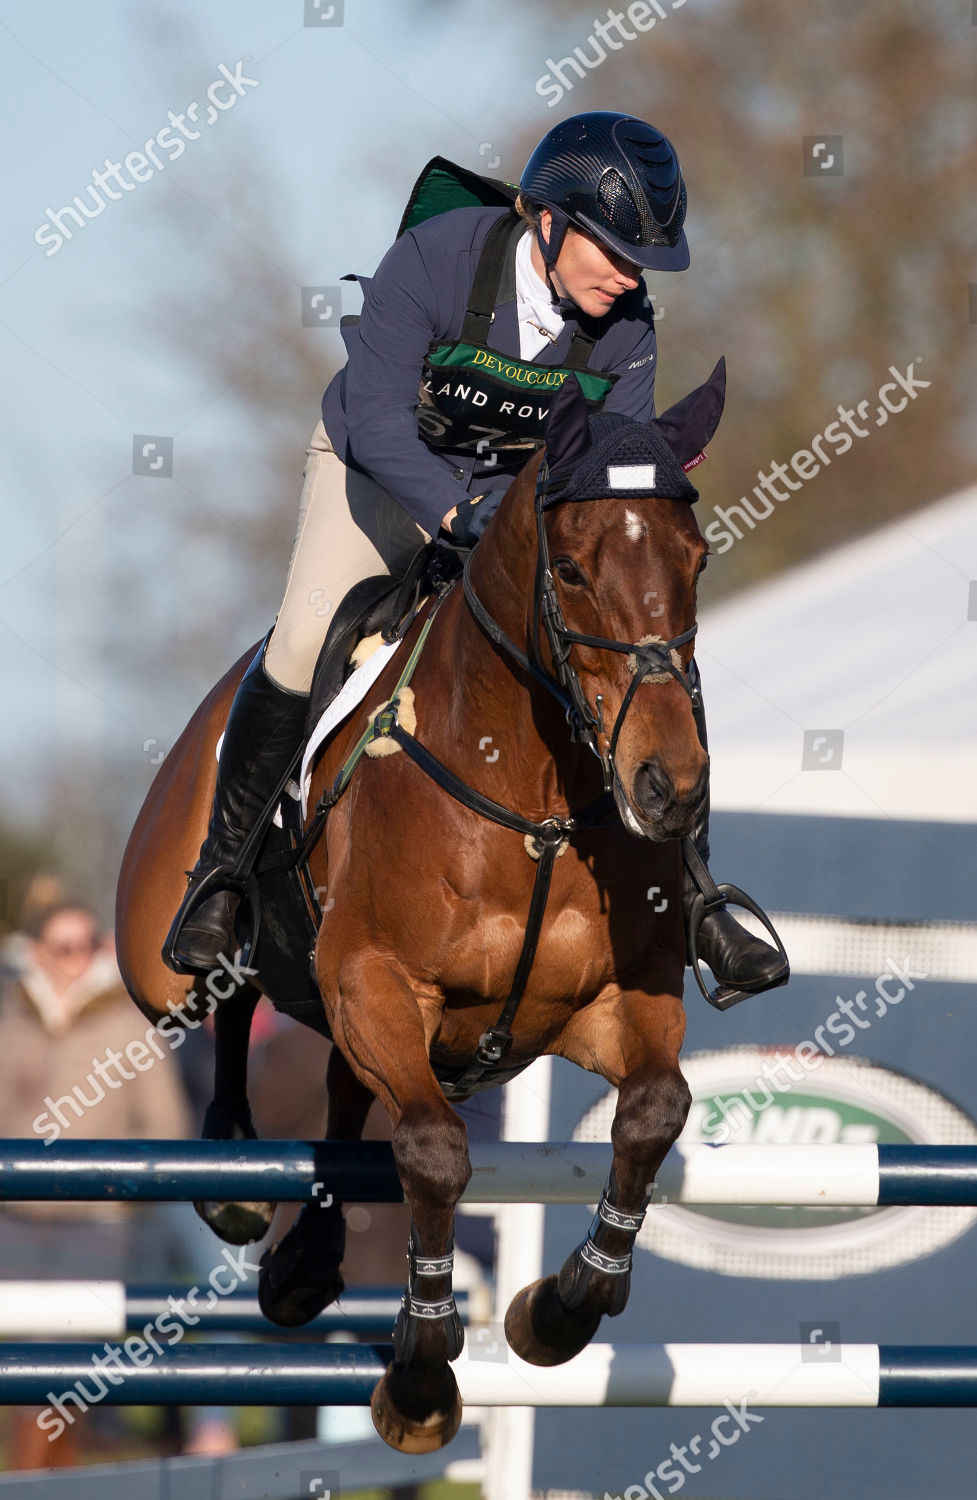 the-landrover-horse-trials-gatcombe-park-gloucestershire-uk-shutterstock-editorial-10165571ad.jpg